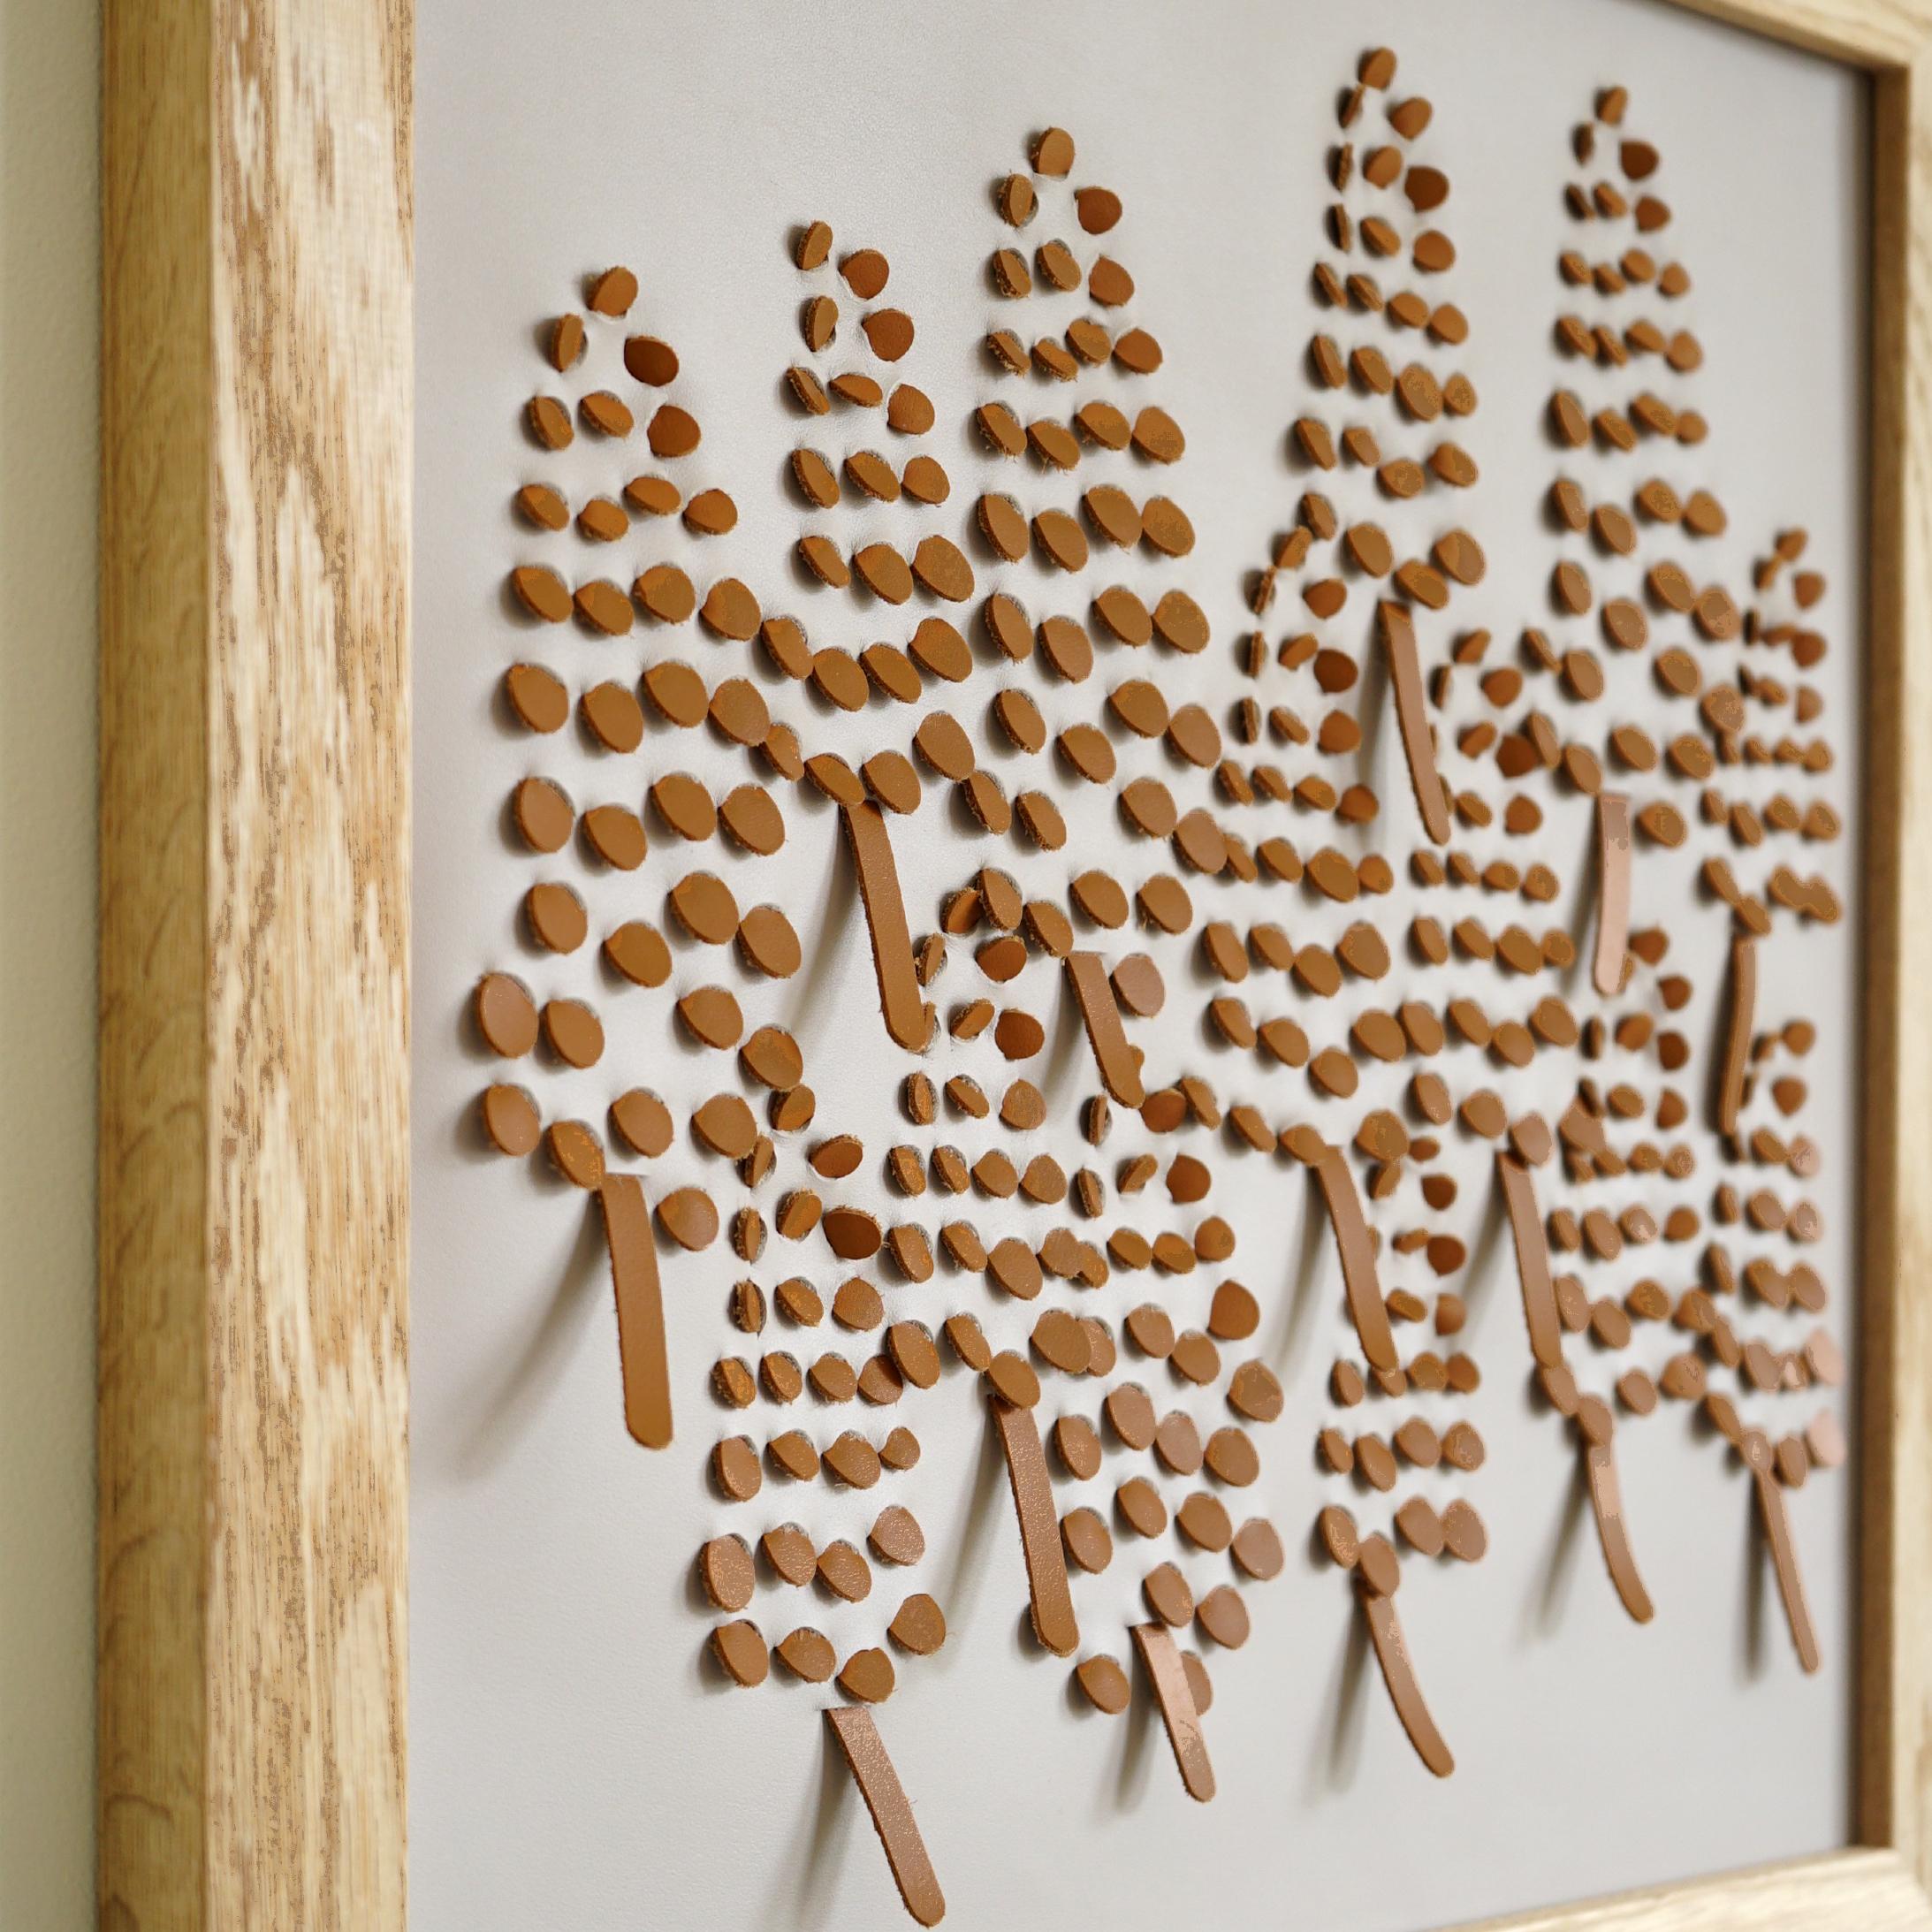 Grape Hyacinth, a Piece of 3D Sculptural Egret and Tan Leather Wall Art